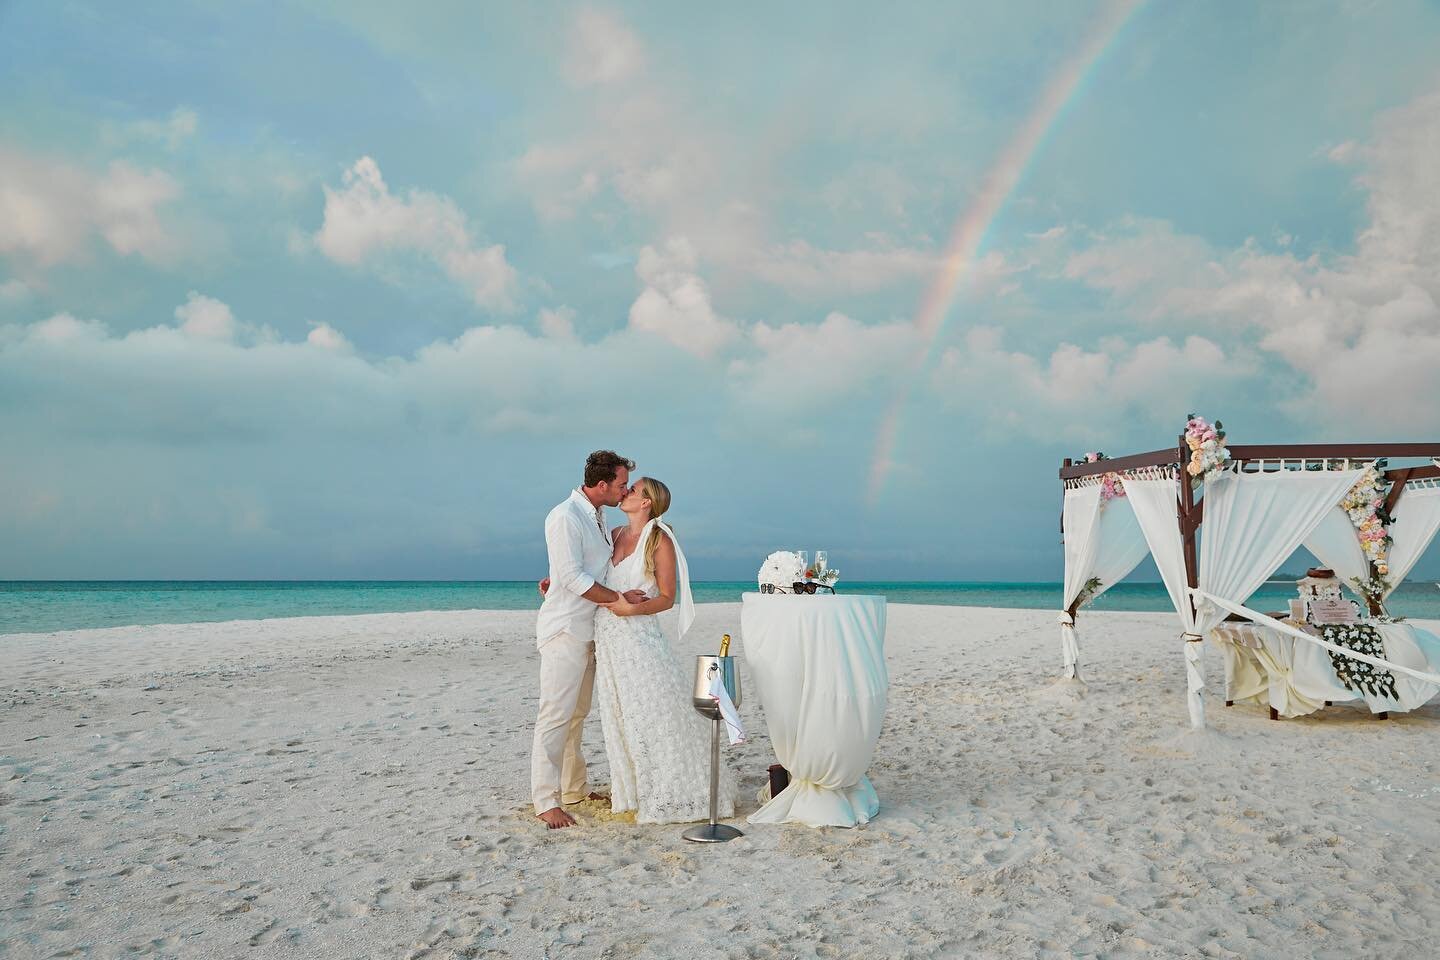 On a remote sandbank far far away&hellip; a sneak peek into our special day! 🤍
.
A full moon, solar eclipse, two rainbows and spinner dolphins what else could we have asked for&hellip; ✨🌈
.
My number one advice still stands, live in the moment it g